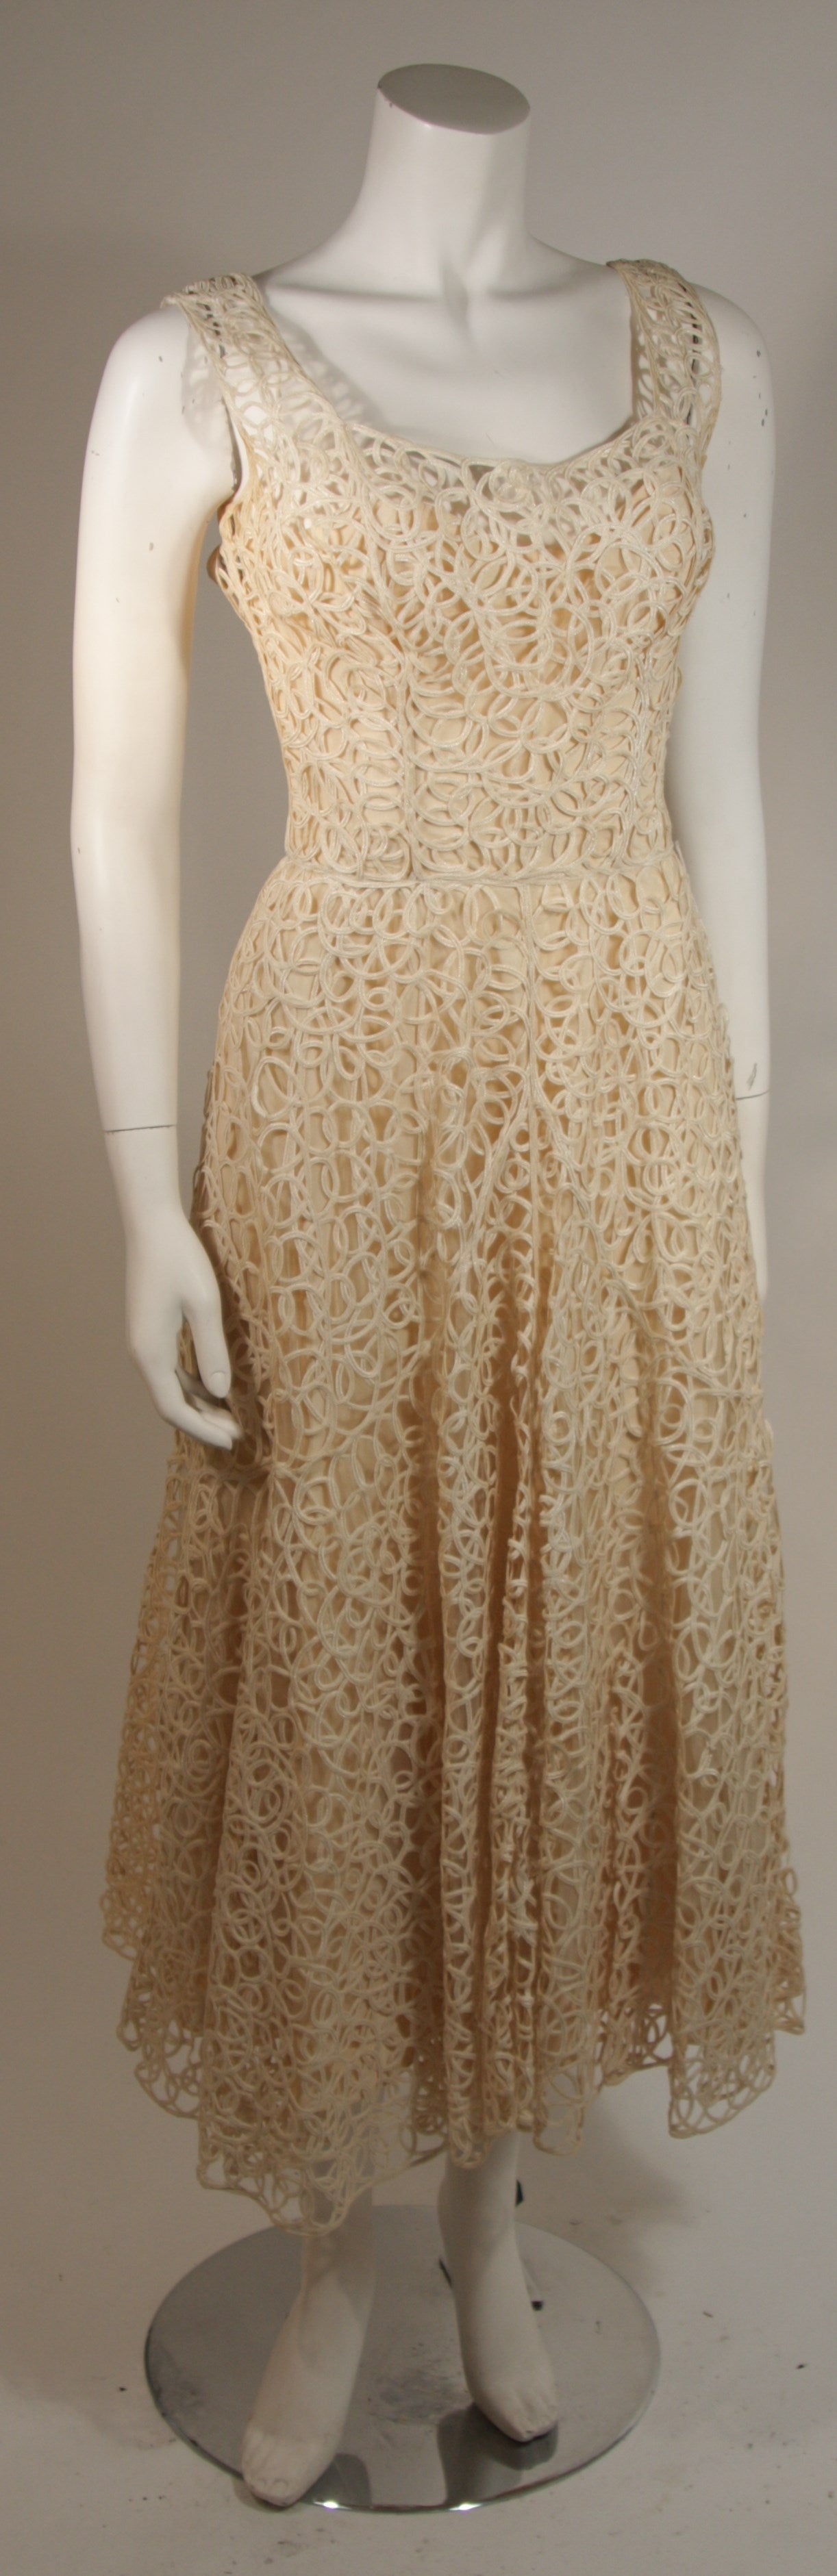 Brown Ceil Chapman Cream Lattice Work Lace Cocktail Dress Size Small For Sale